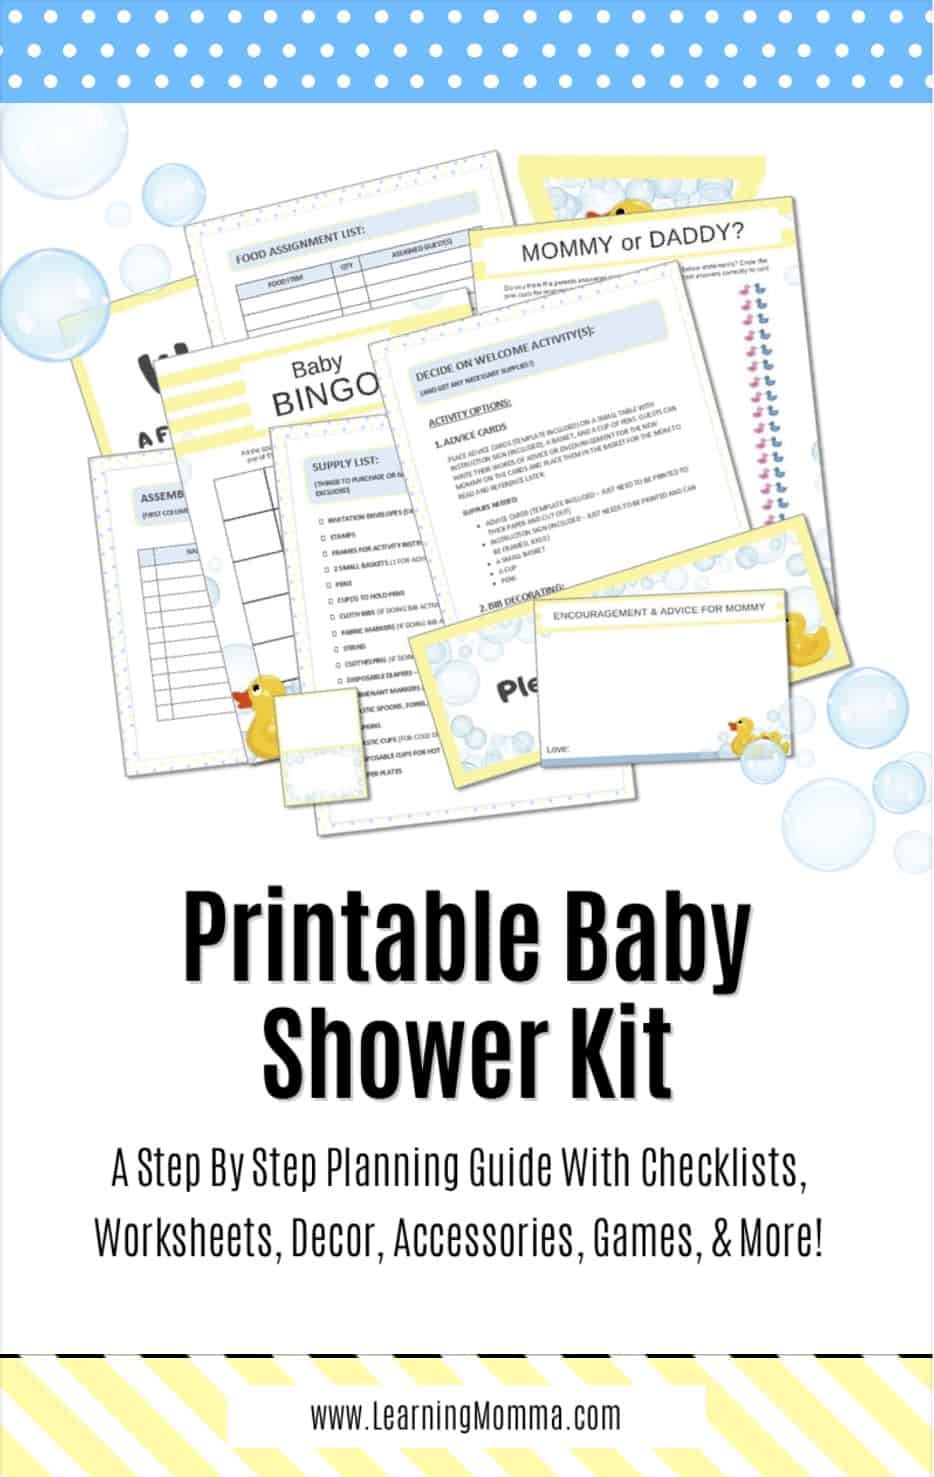 How To Plan A Baby Shower The Complete Printable Baby Shower Kit